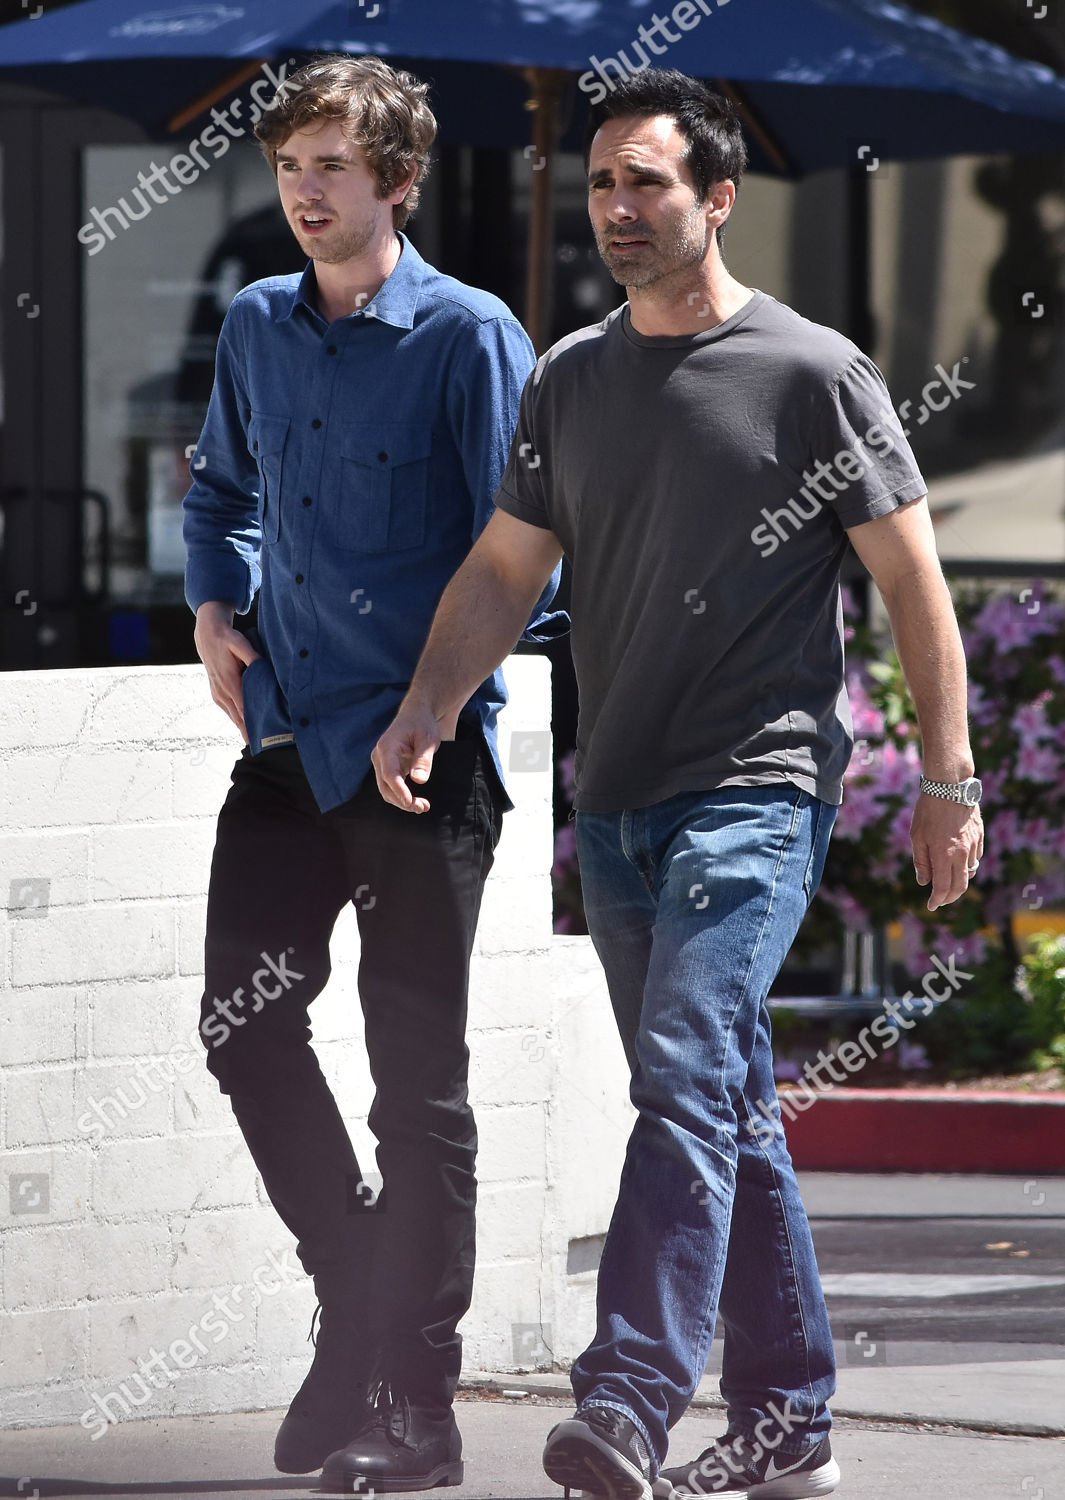 ¿Cuánto mide Freddie Highmore?  Freddie-highmore-and-nestor-carbonell-out-and-about-los-angeles-usa-shutterstock-editorial-9643000l